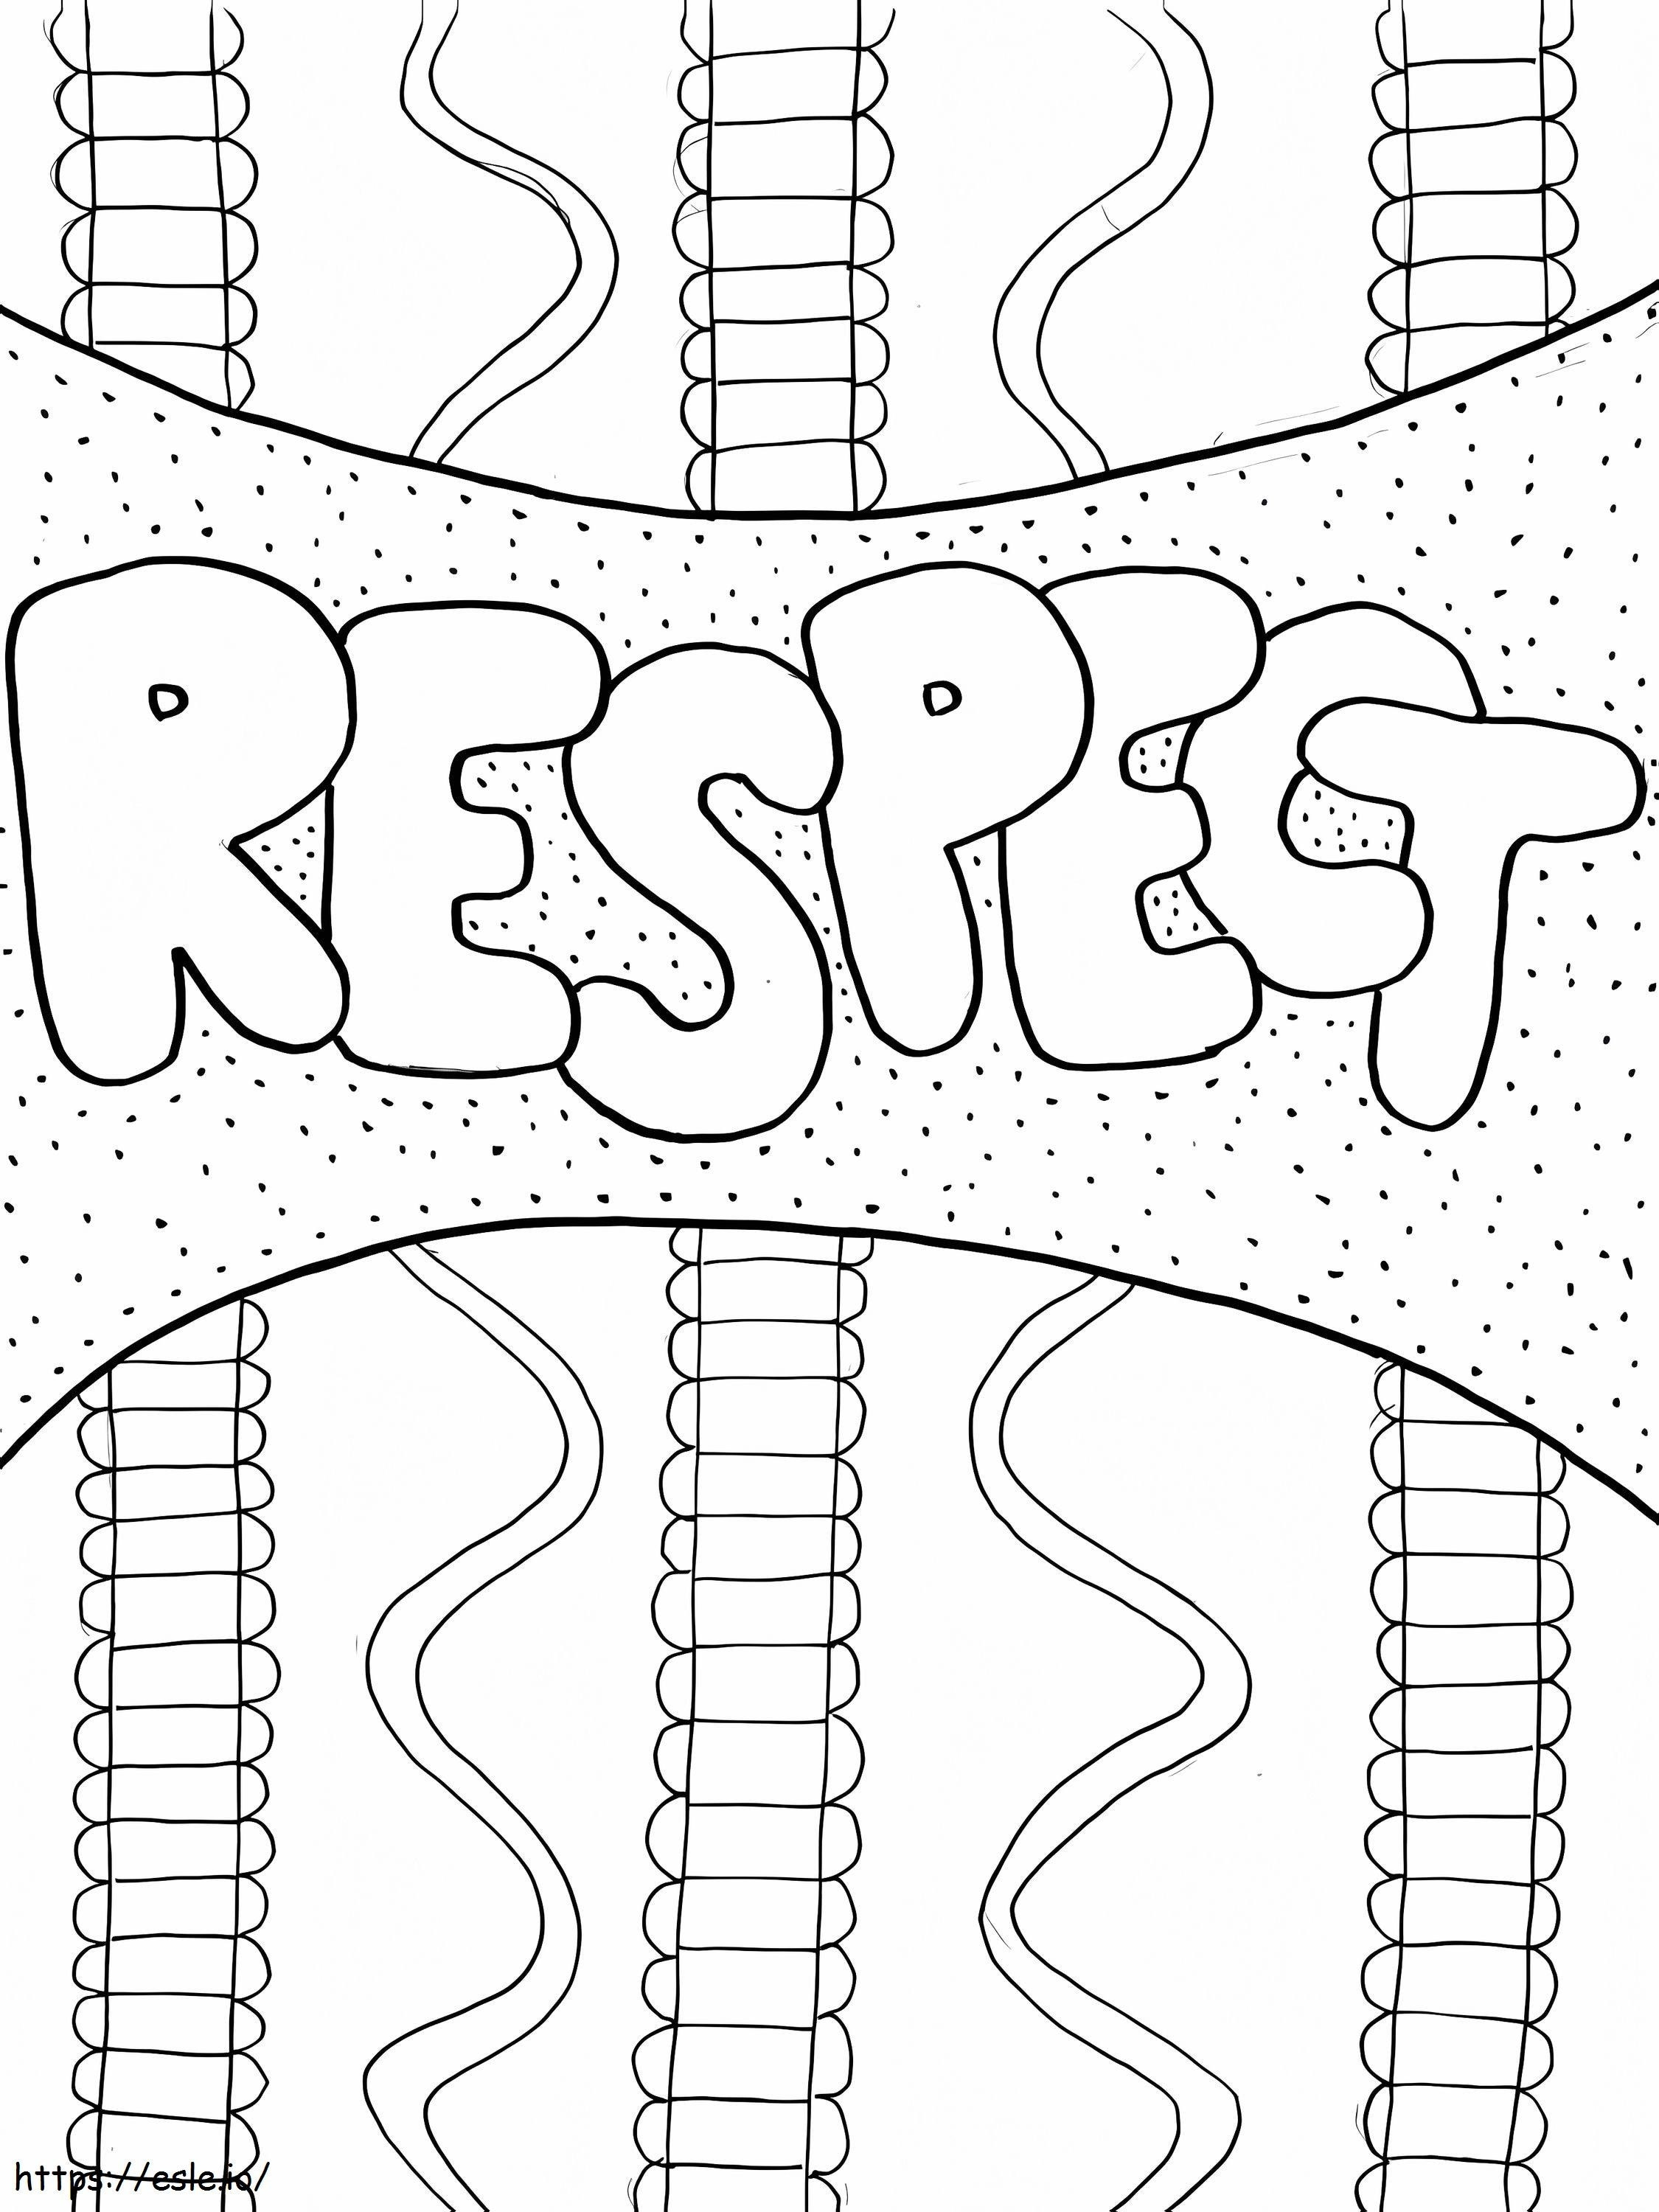 Respect Printable coloring page